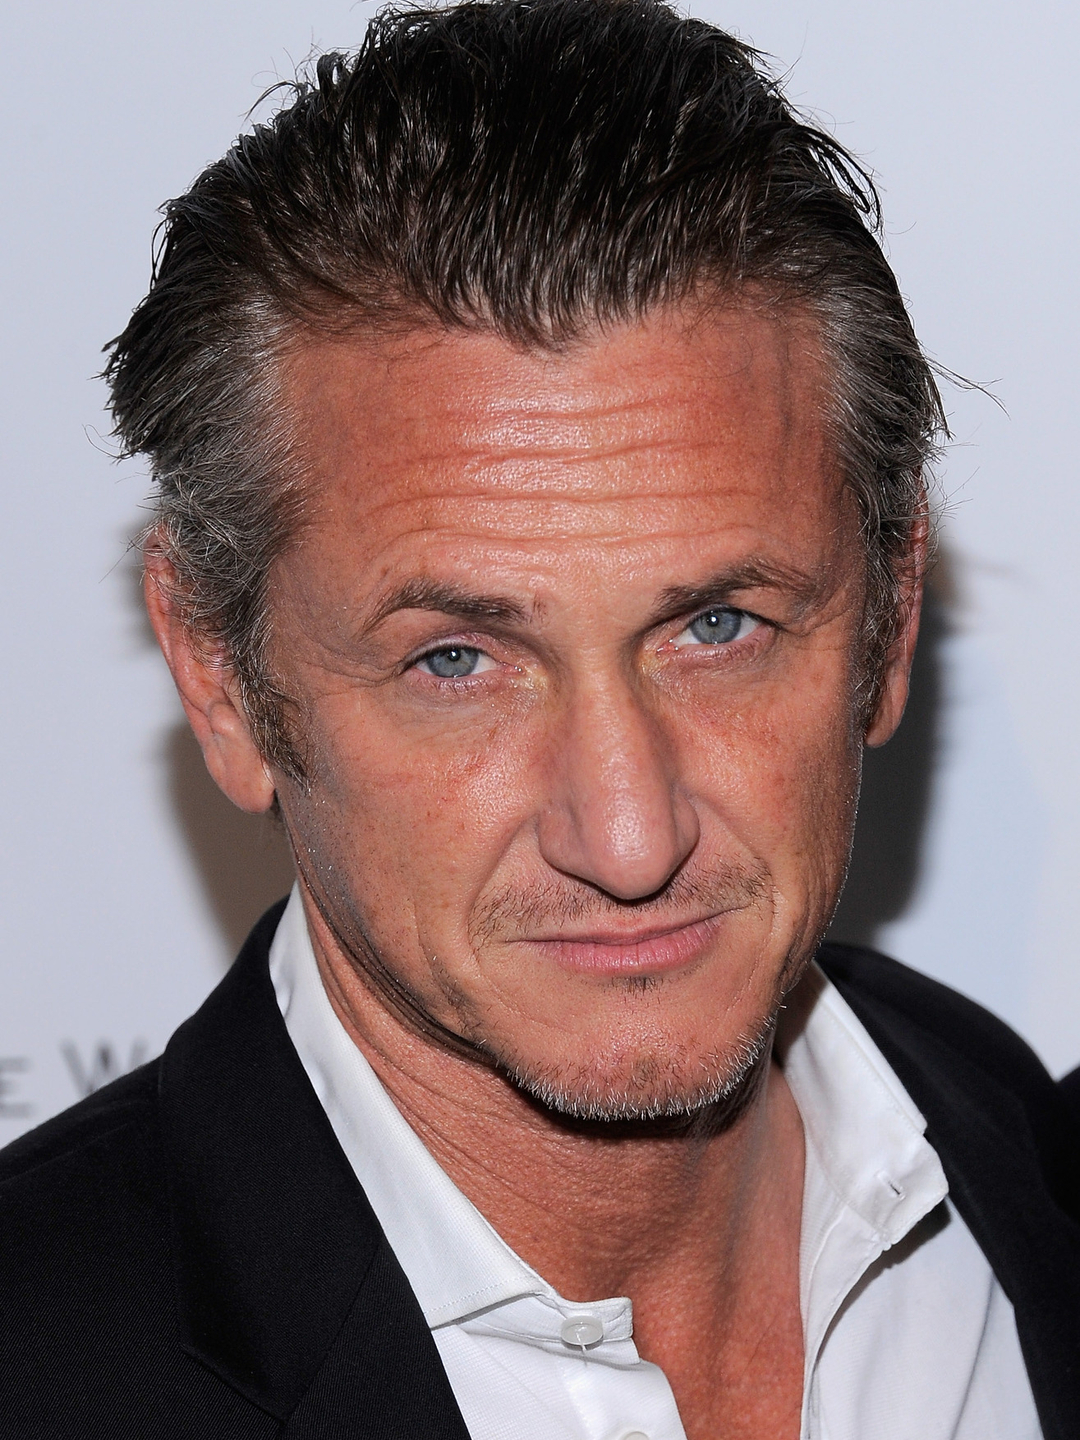 Sean Penn does he have a wife